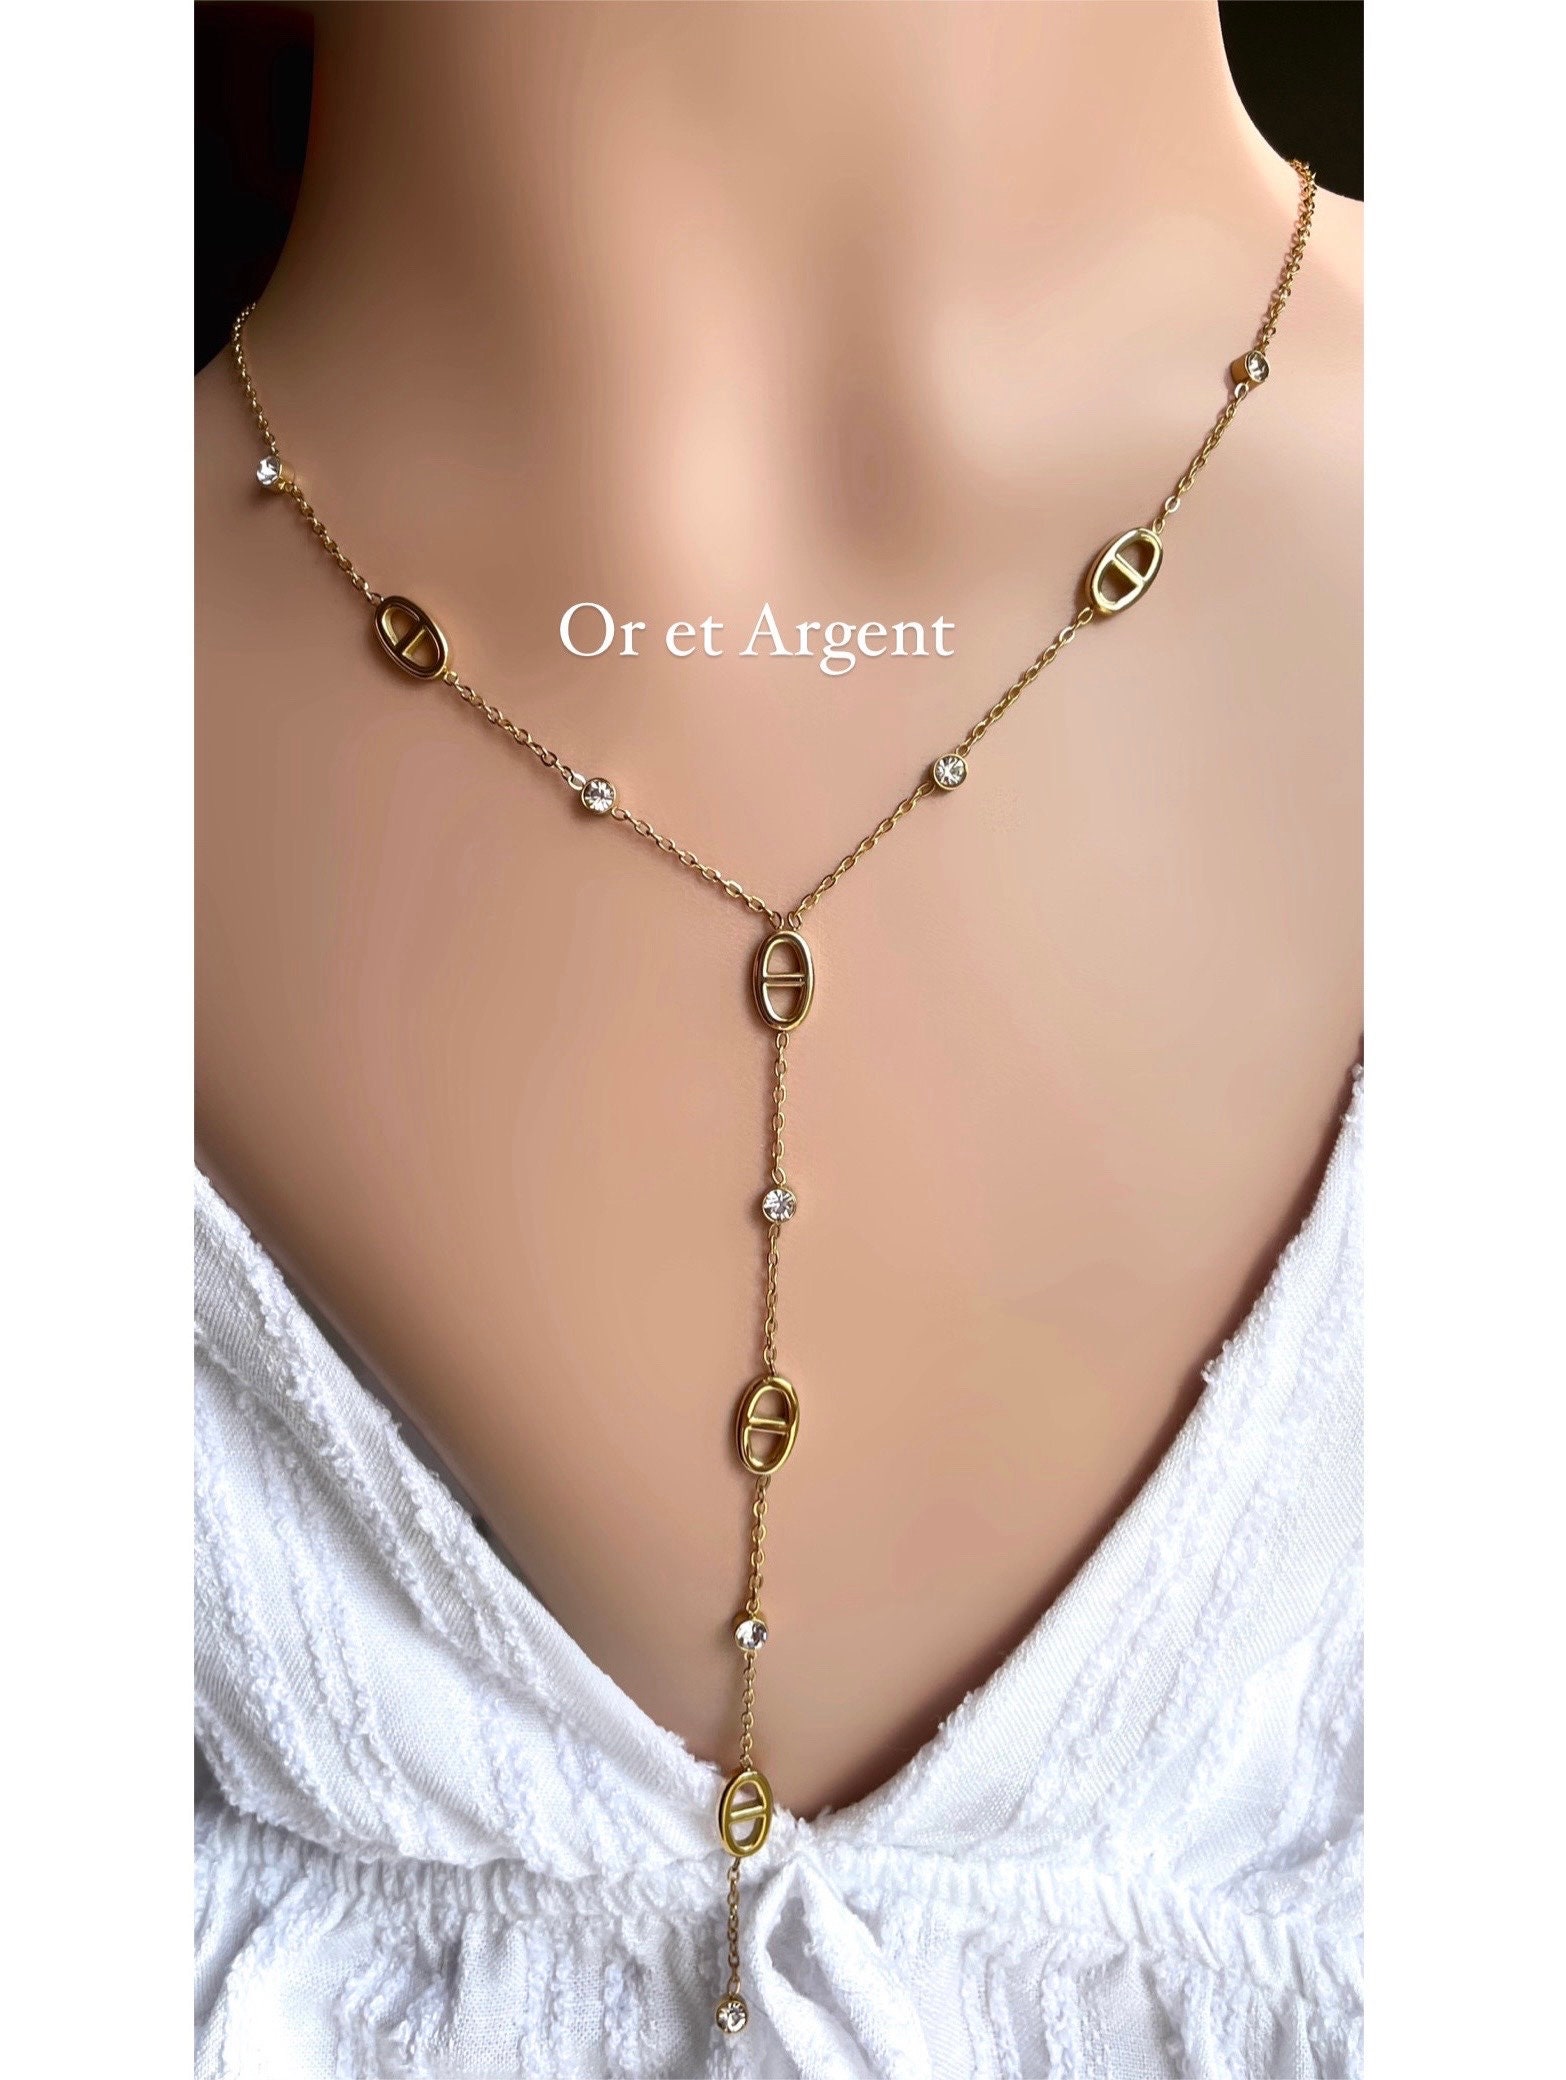 Stylish and practical solution for broken or claspless necklaces